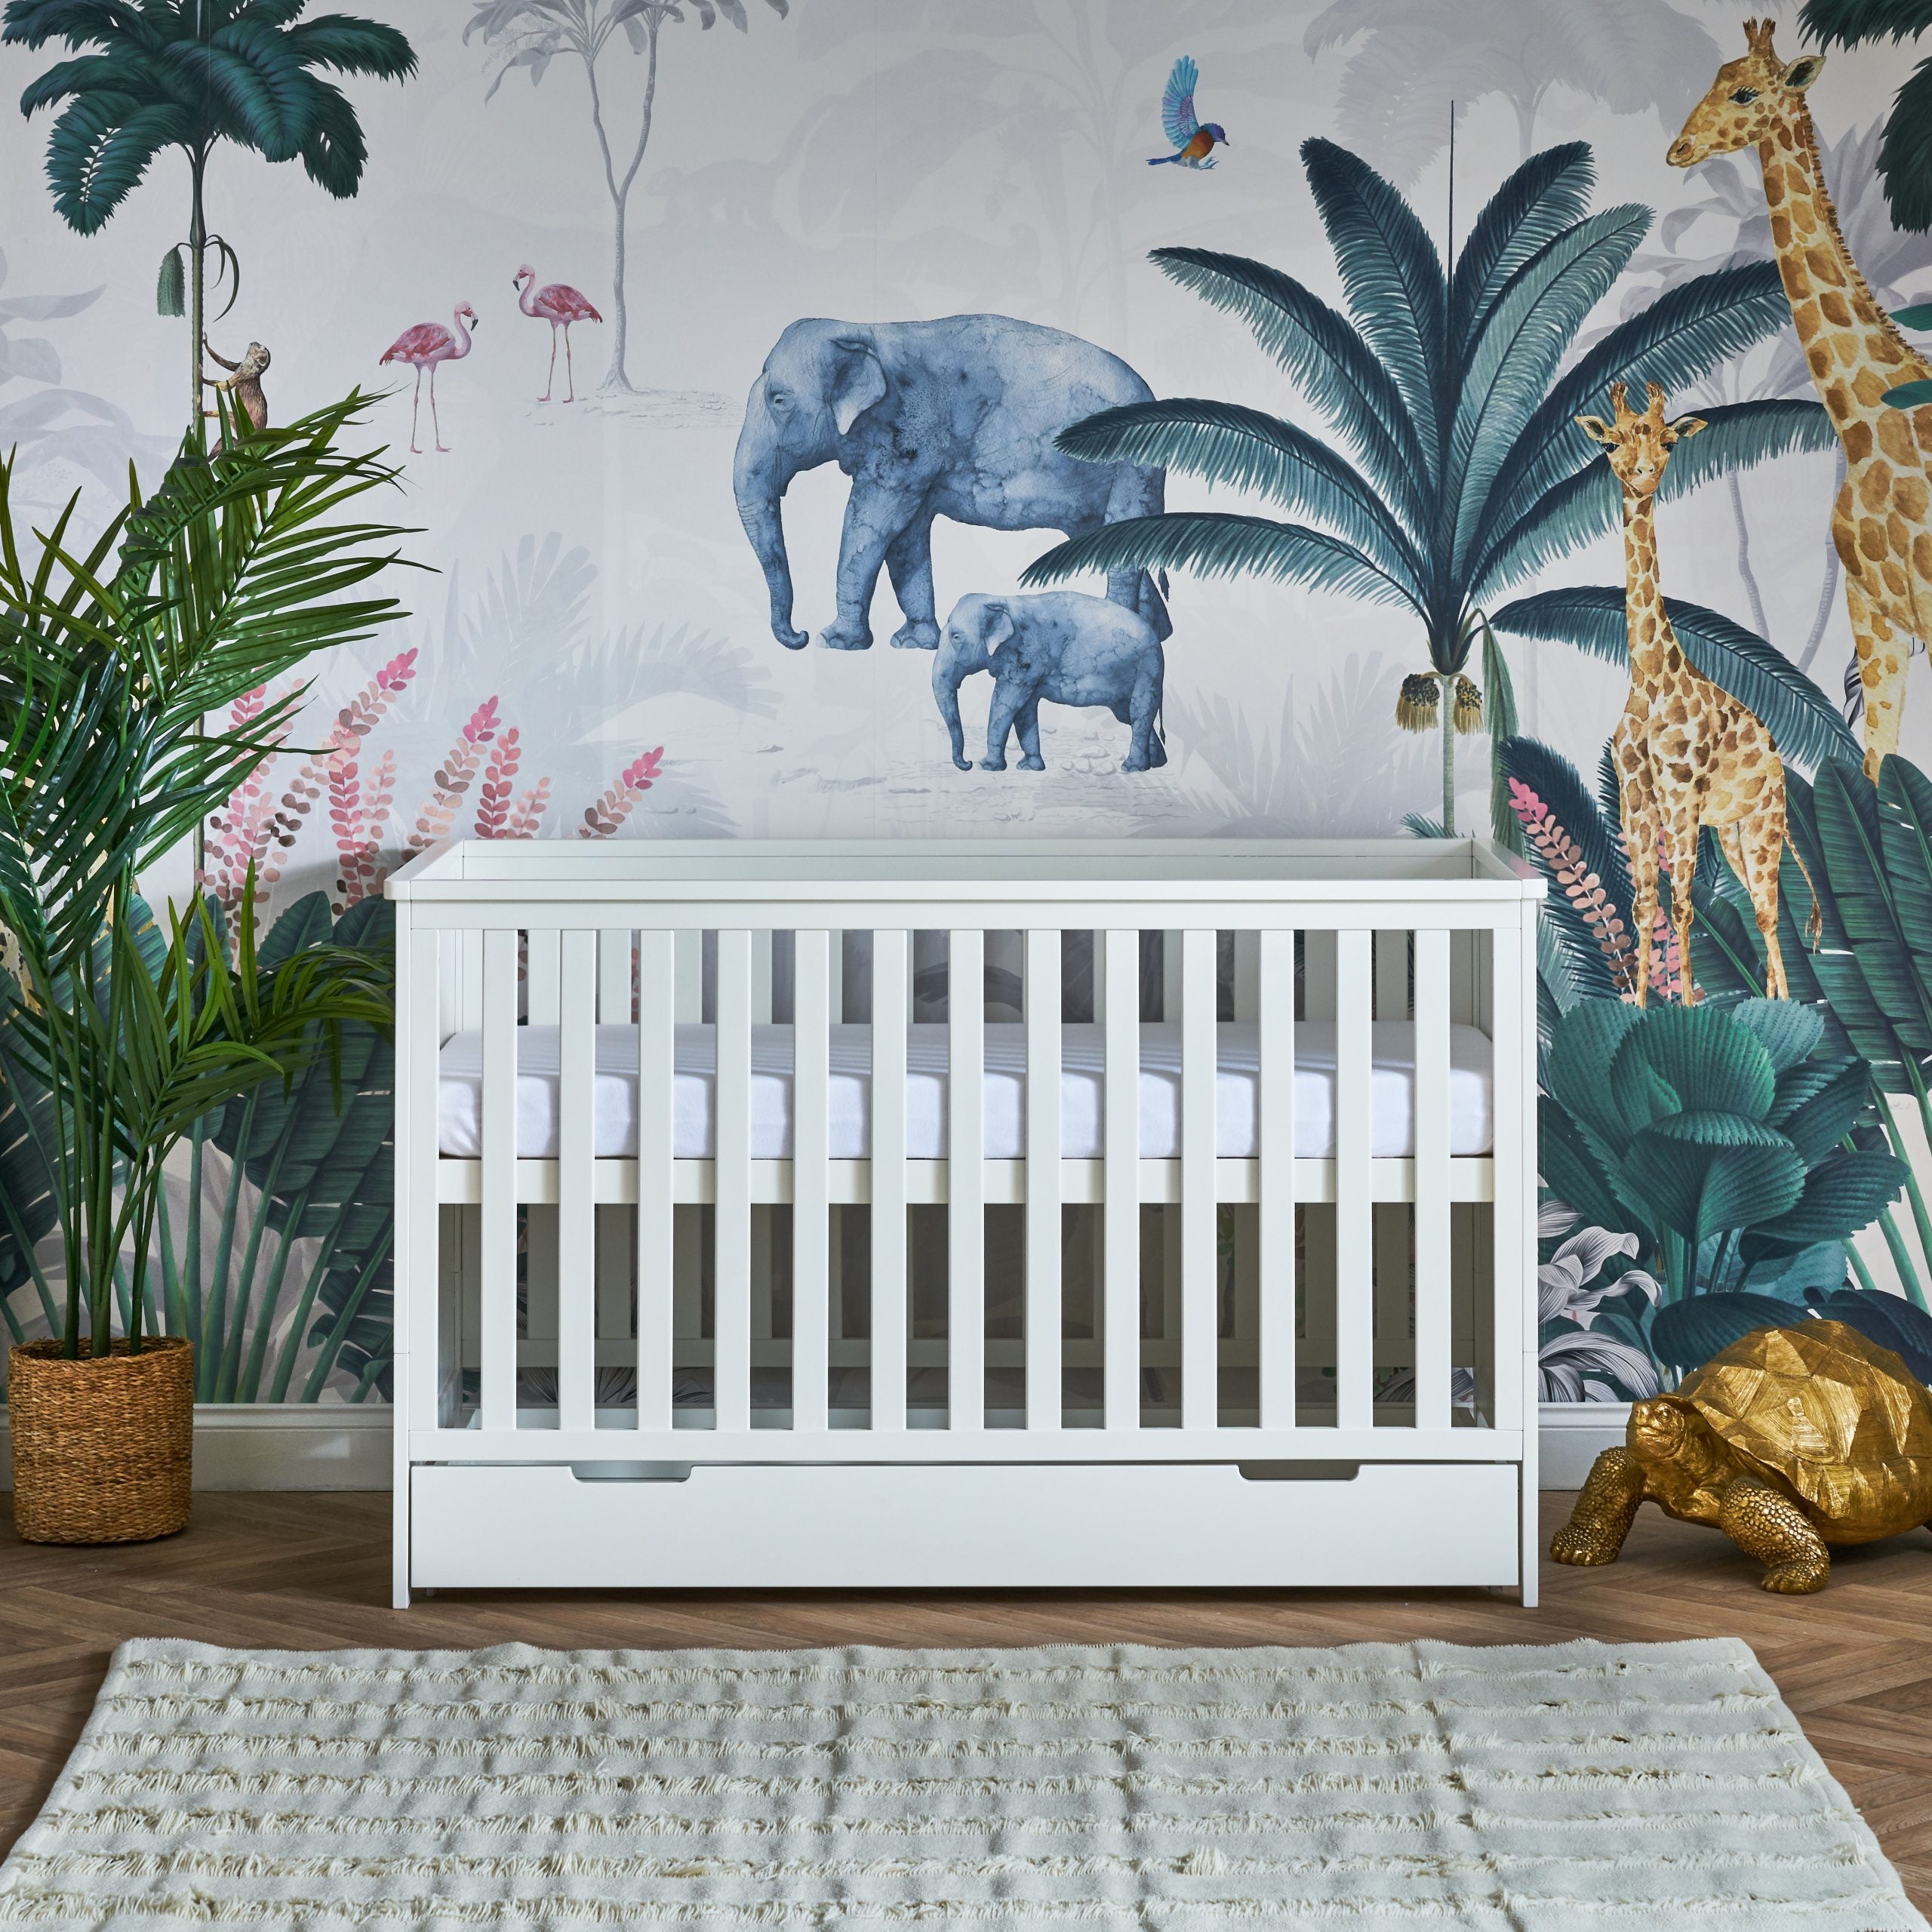 Obaby Under Drawer 120x60 - White Evie -  | For Your Little One